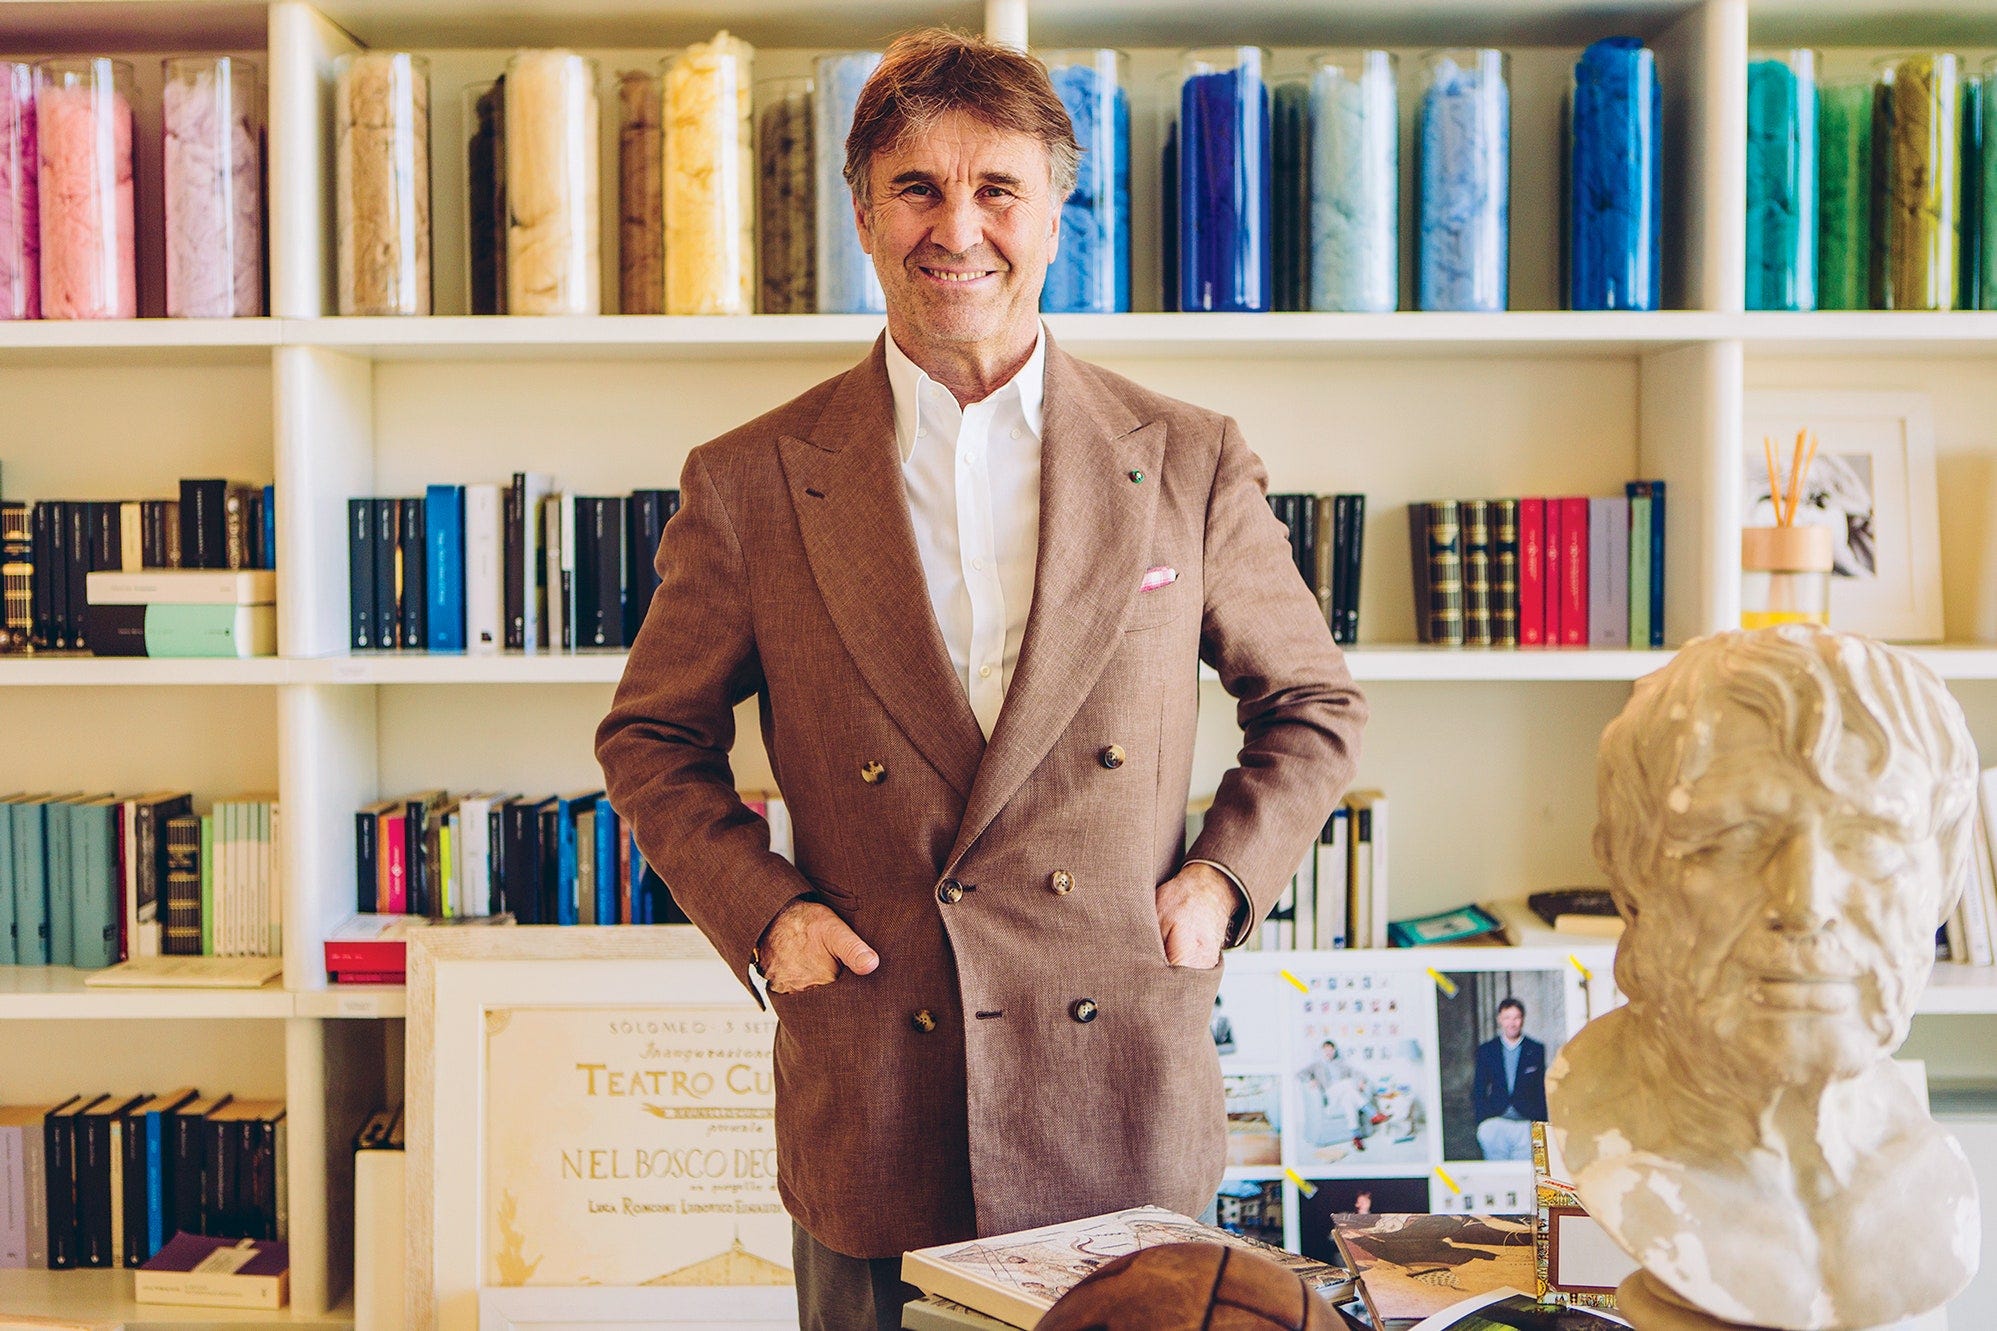 Brunello Cucinelli: On Beauty and Dignity with Brunello Cucinelli